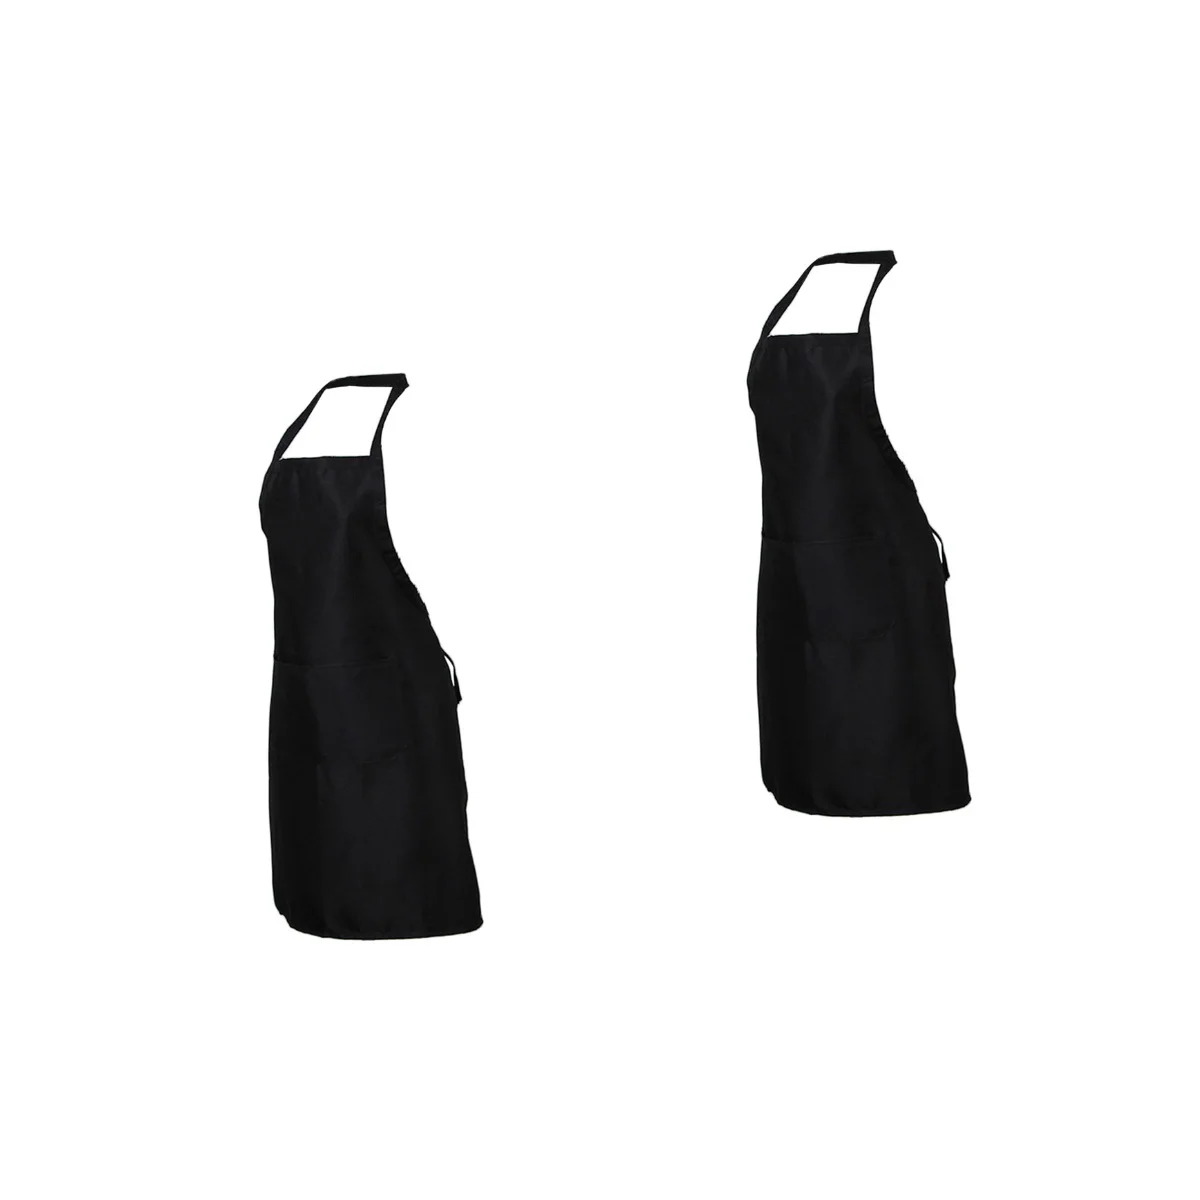 

Apron Bib Aprons Painting Chef Smock Work School Cooking Polyester Bar Pocketsutility Server Adjustable Barbecue Waitress